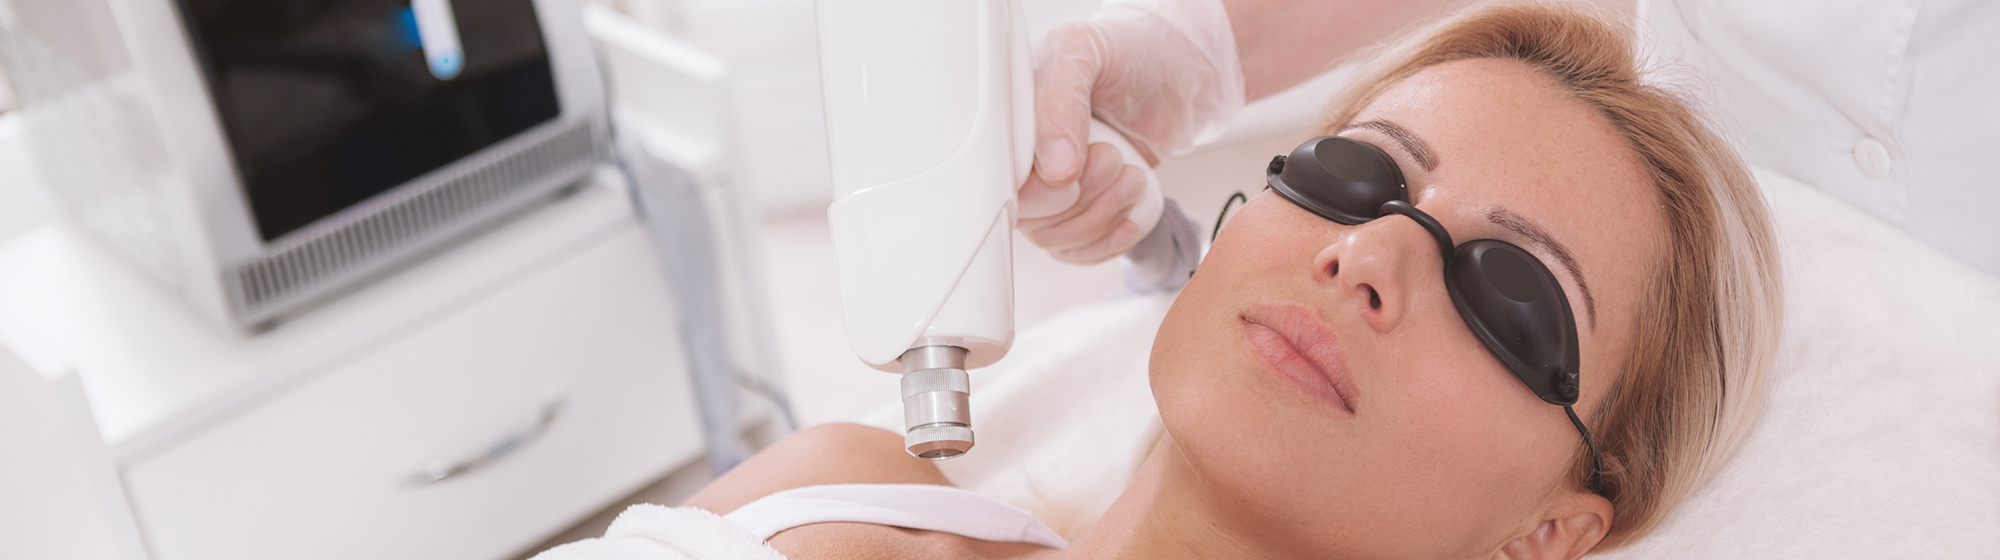 Laser Treatments in Tampa Bay, FL